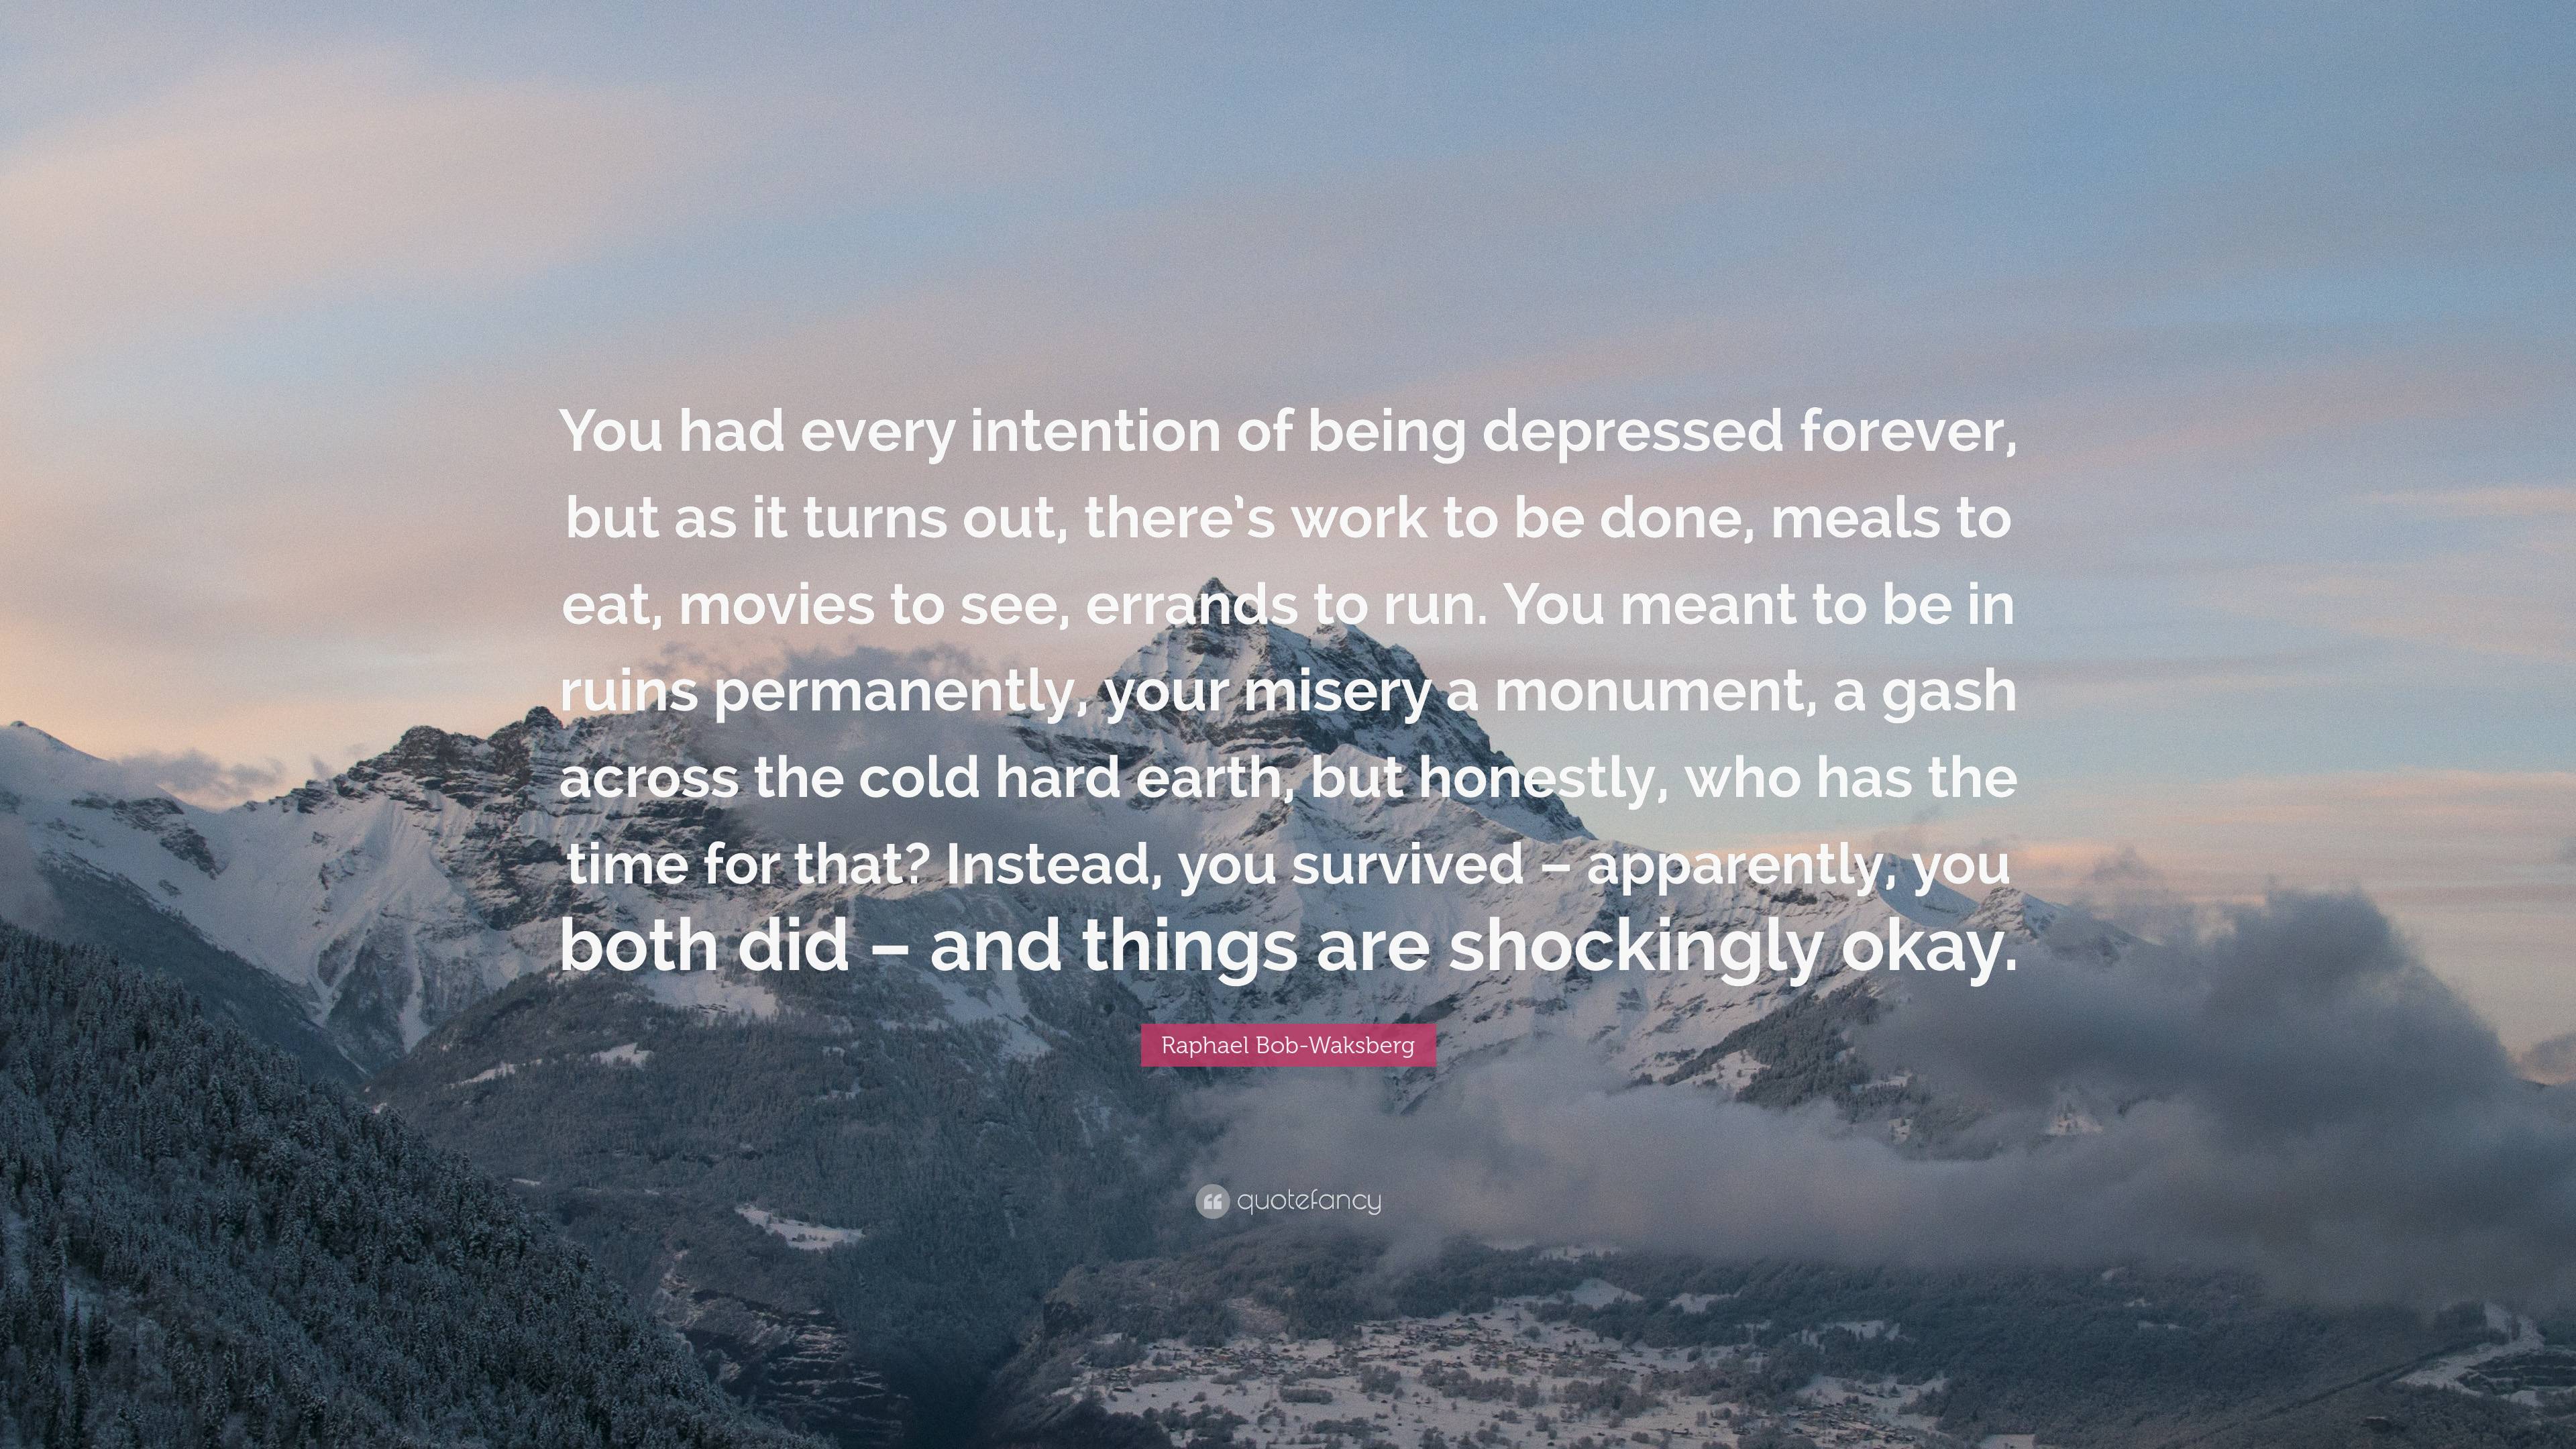 Raphael Bob-Waksberg Quote: “You had every intention of being depressed ...